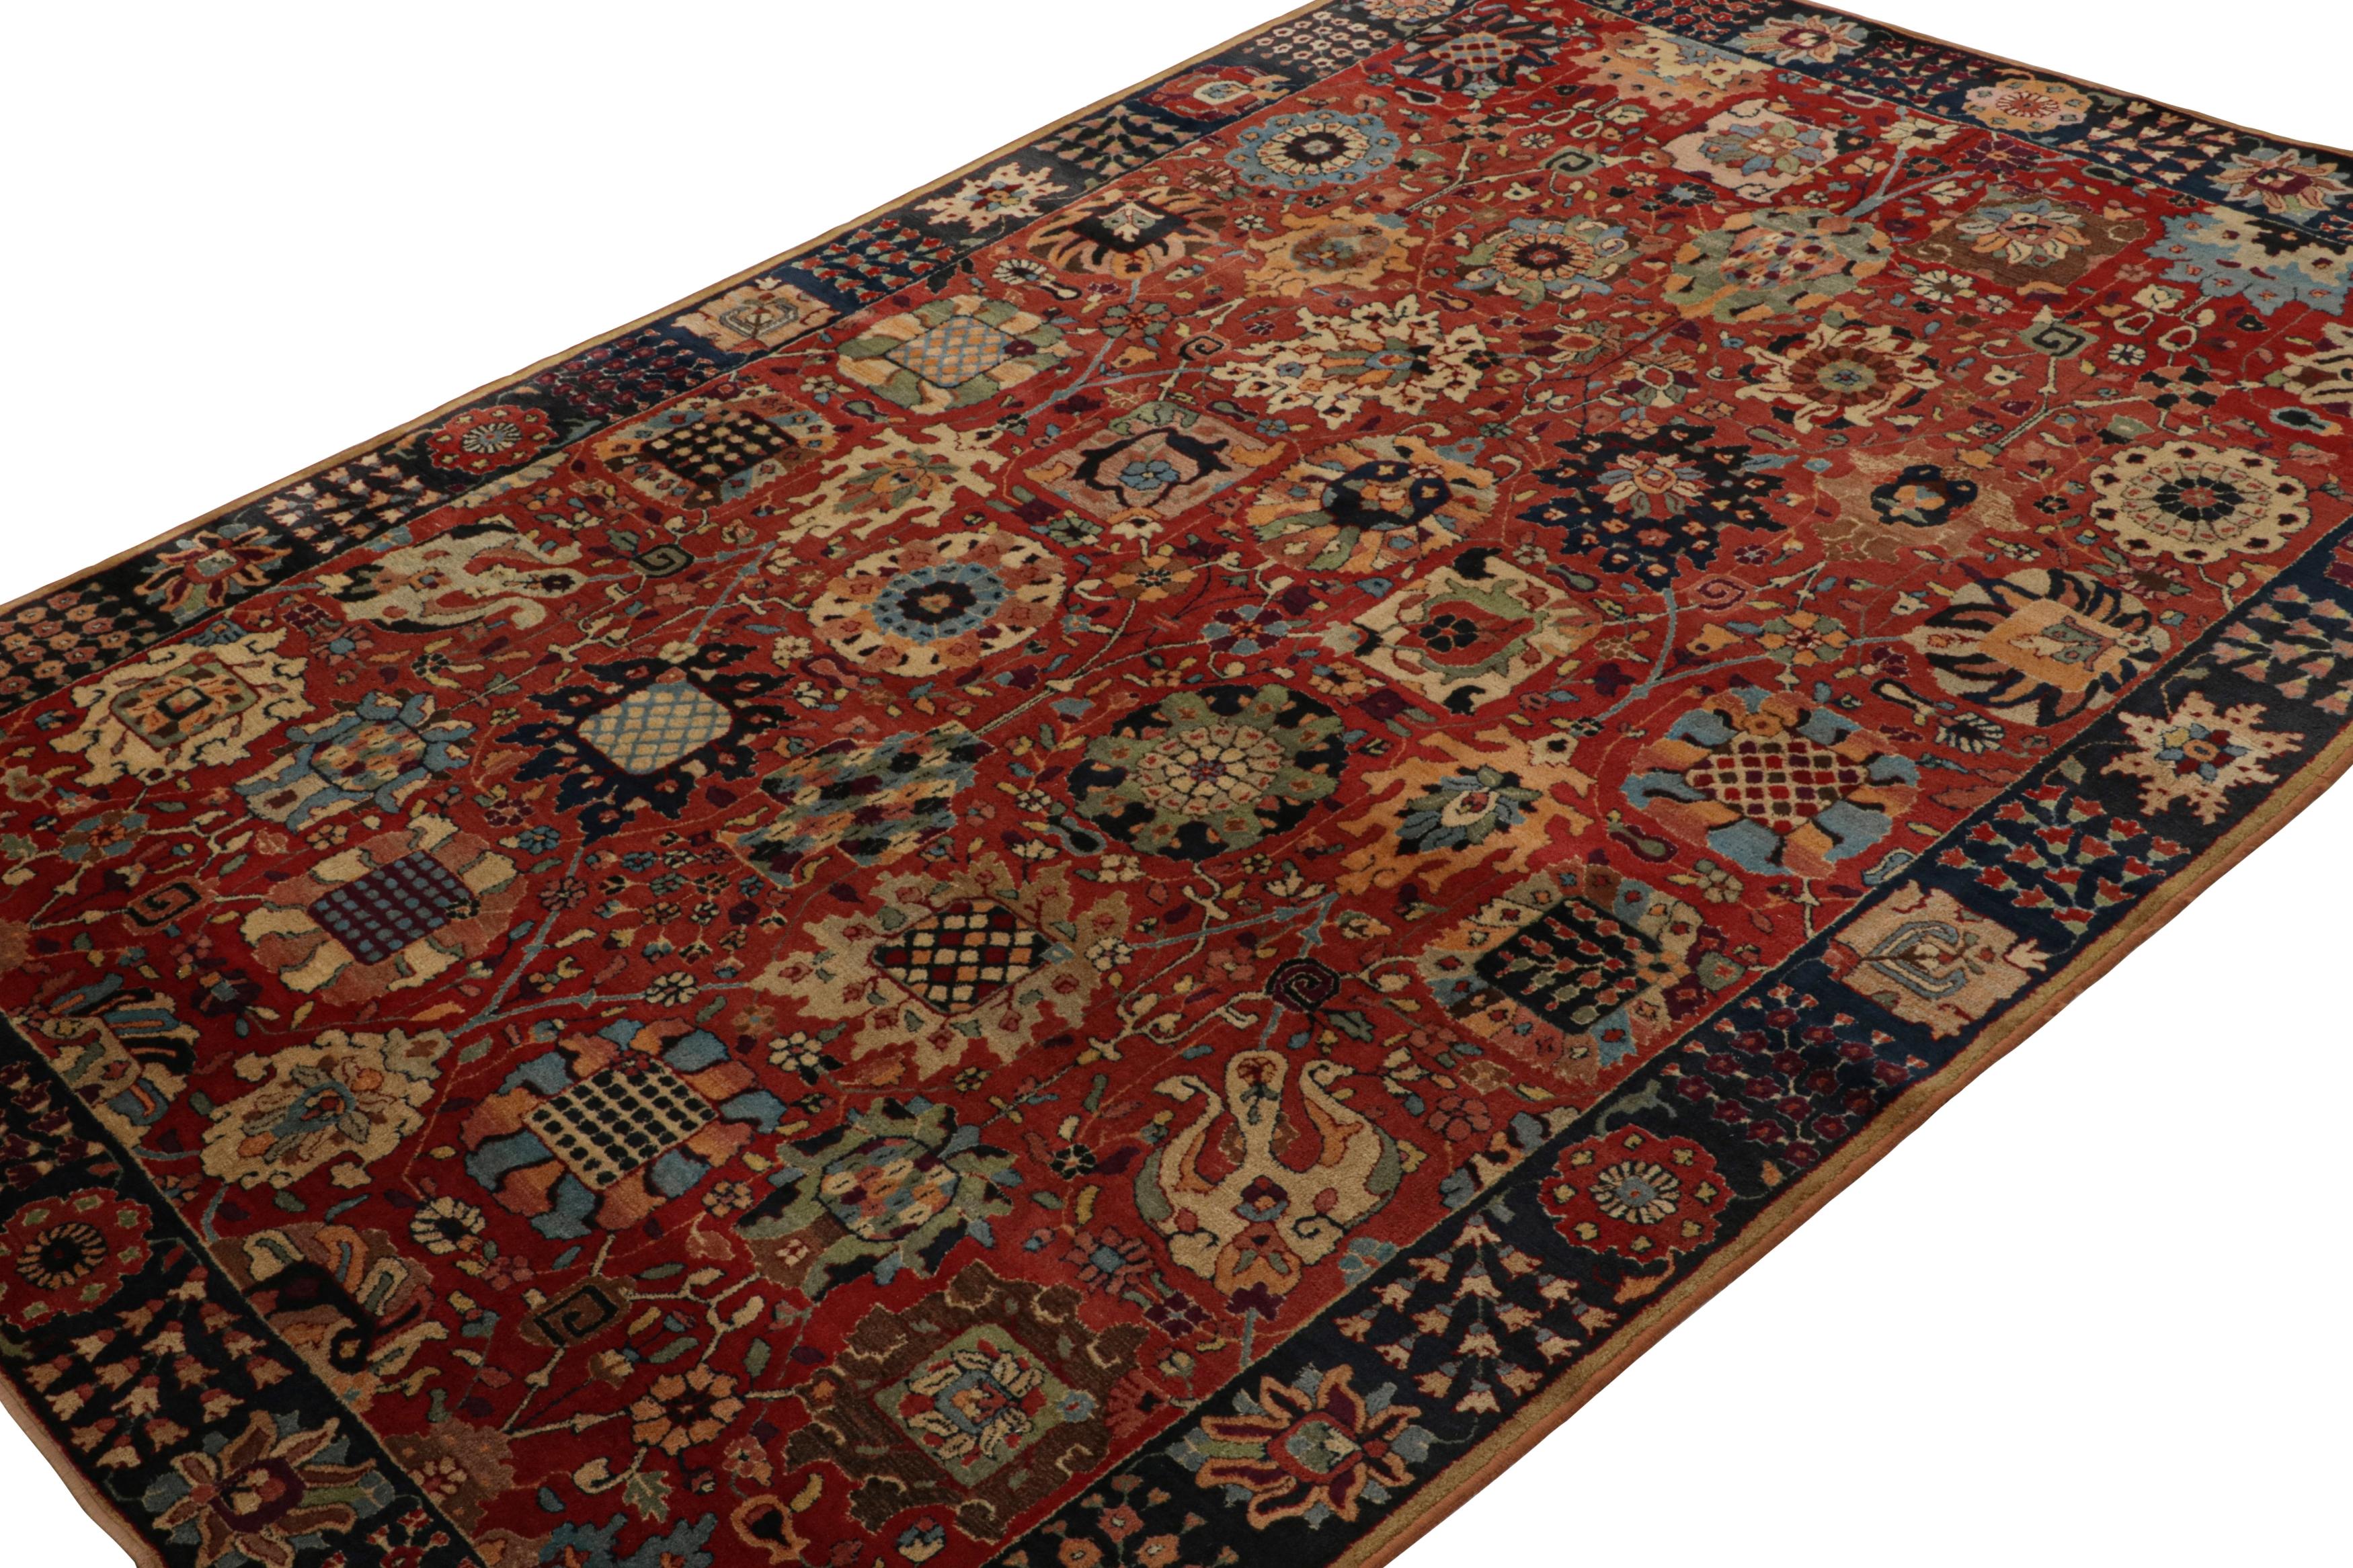 This 6x10 antique hooked rug is believed to be a rare Tetex rug—a curation from the Rug & Kilim Collection. Handmade with wool and originating from Germany circa 1920-1930, its design enjoys beige-brown and navy blue floral patterns on a red